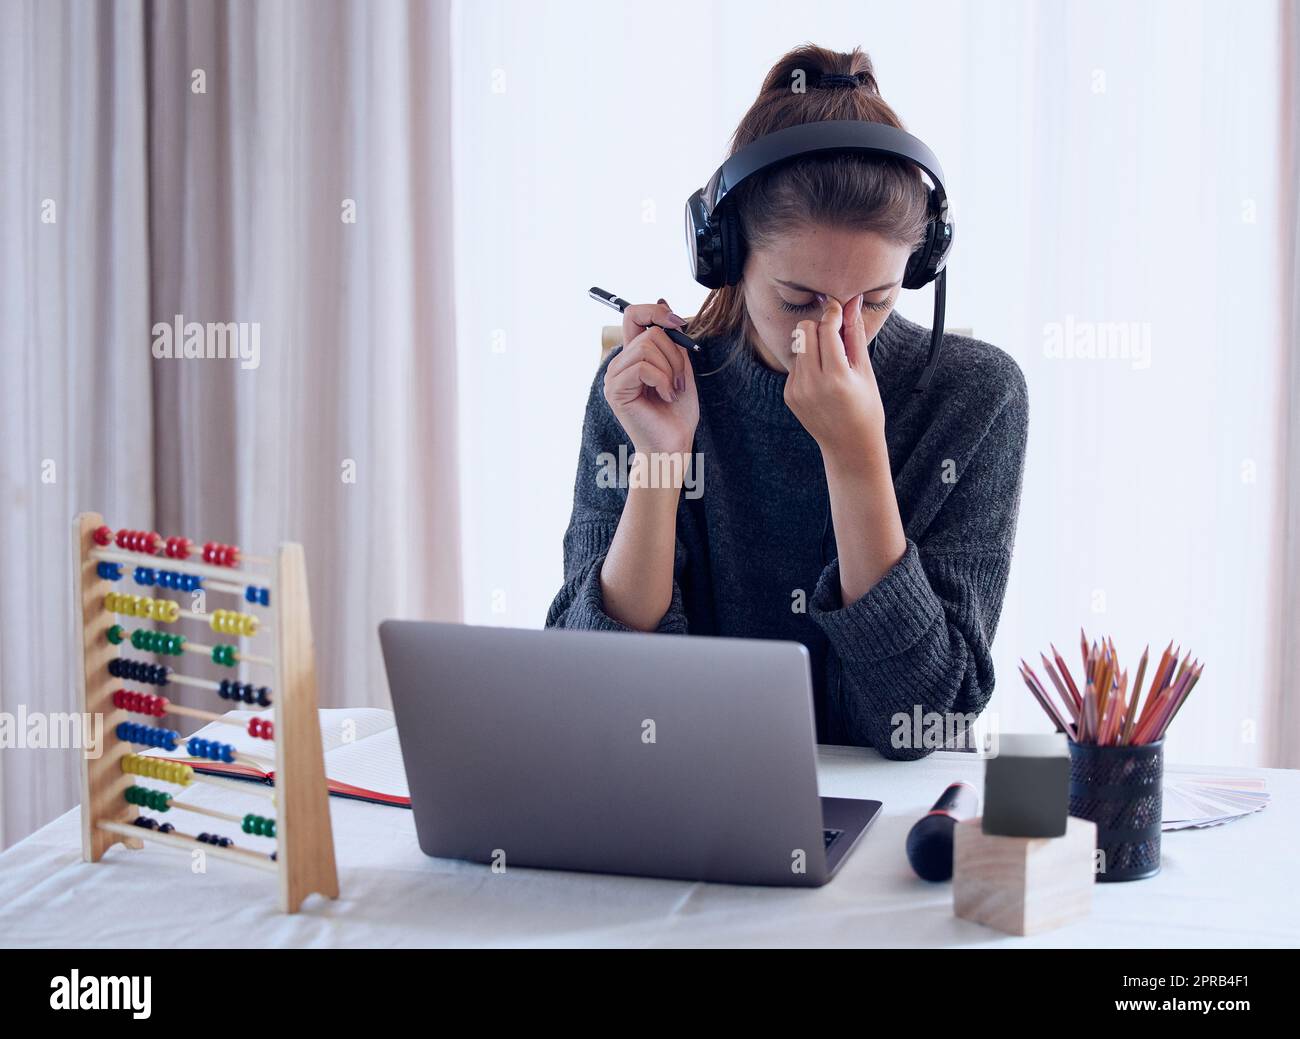 Burnout can be prevented with proper self-care. a young getting a headache while teaching an online lesson with her laptop at home. Stock Photo